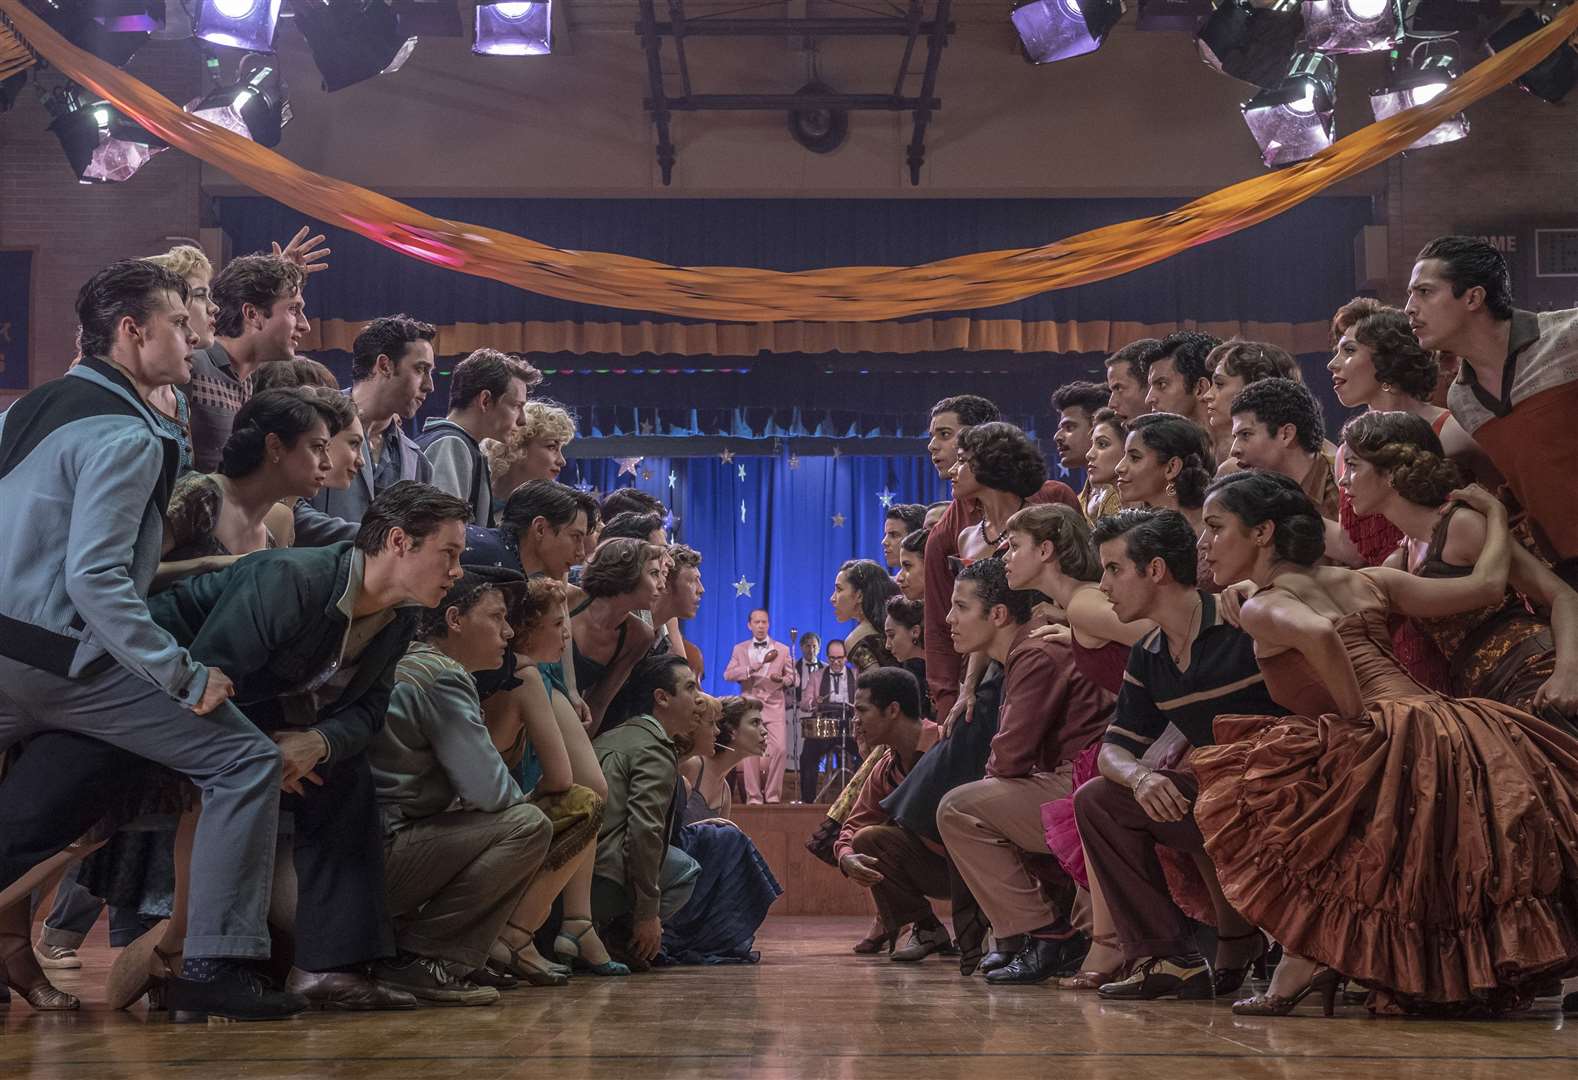 20th Century Studios’ West Side Story is due out in 2021